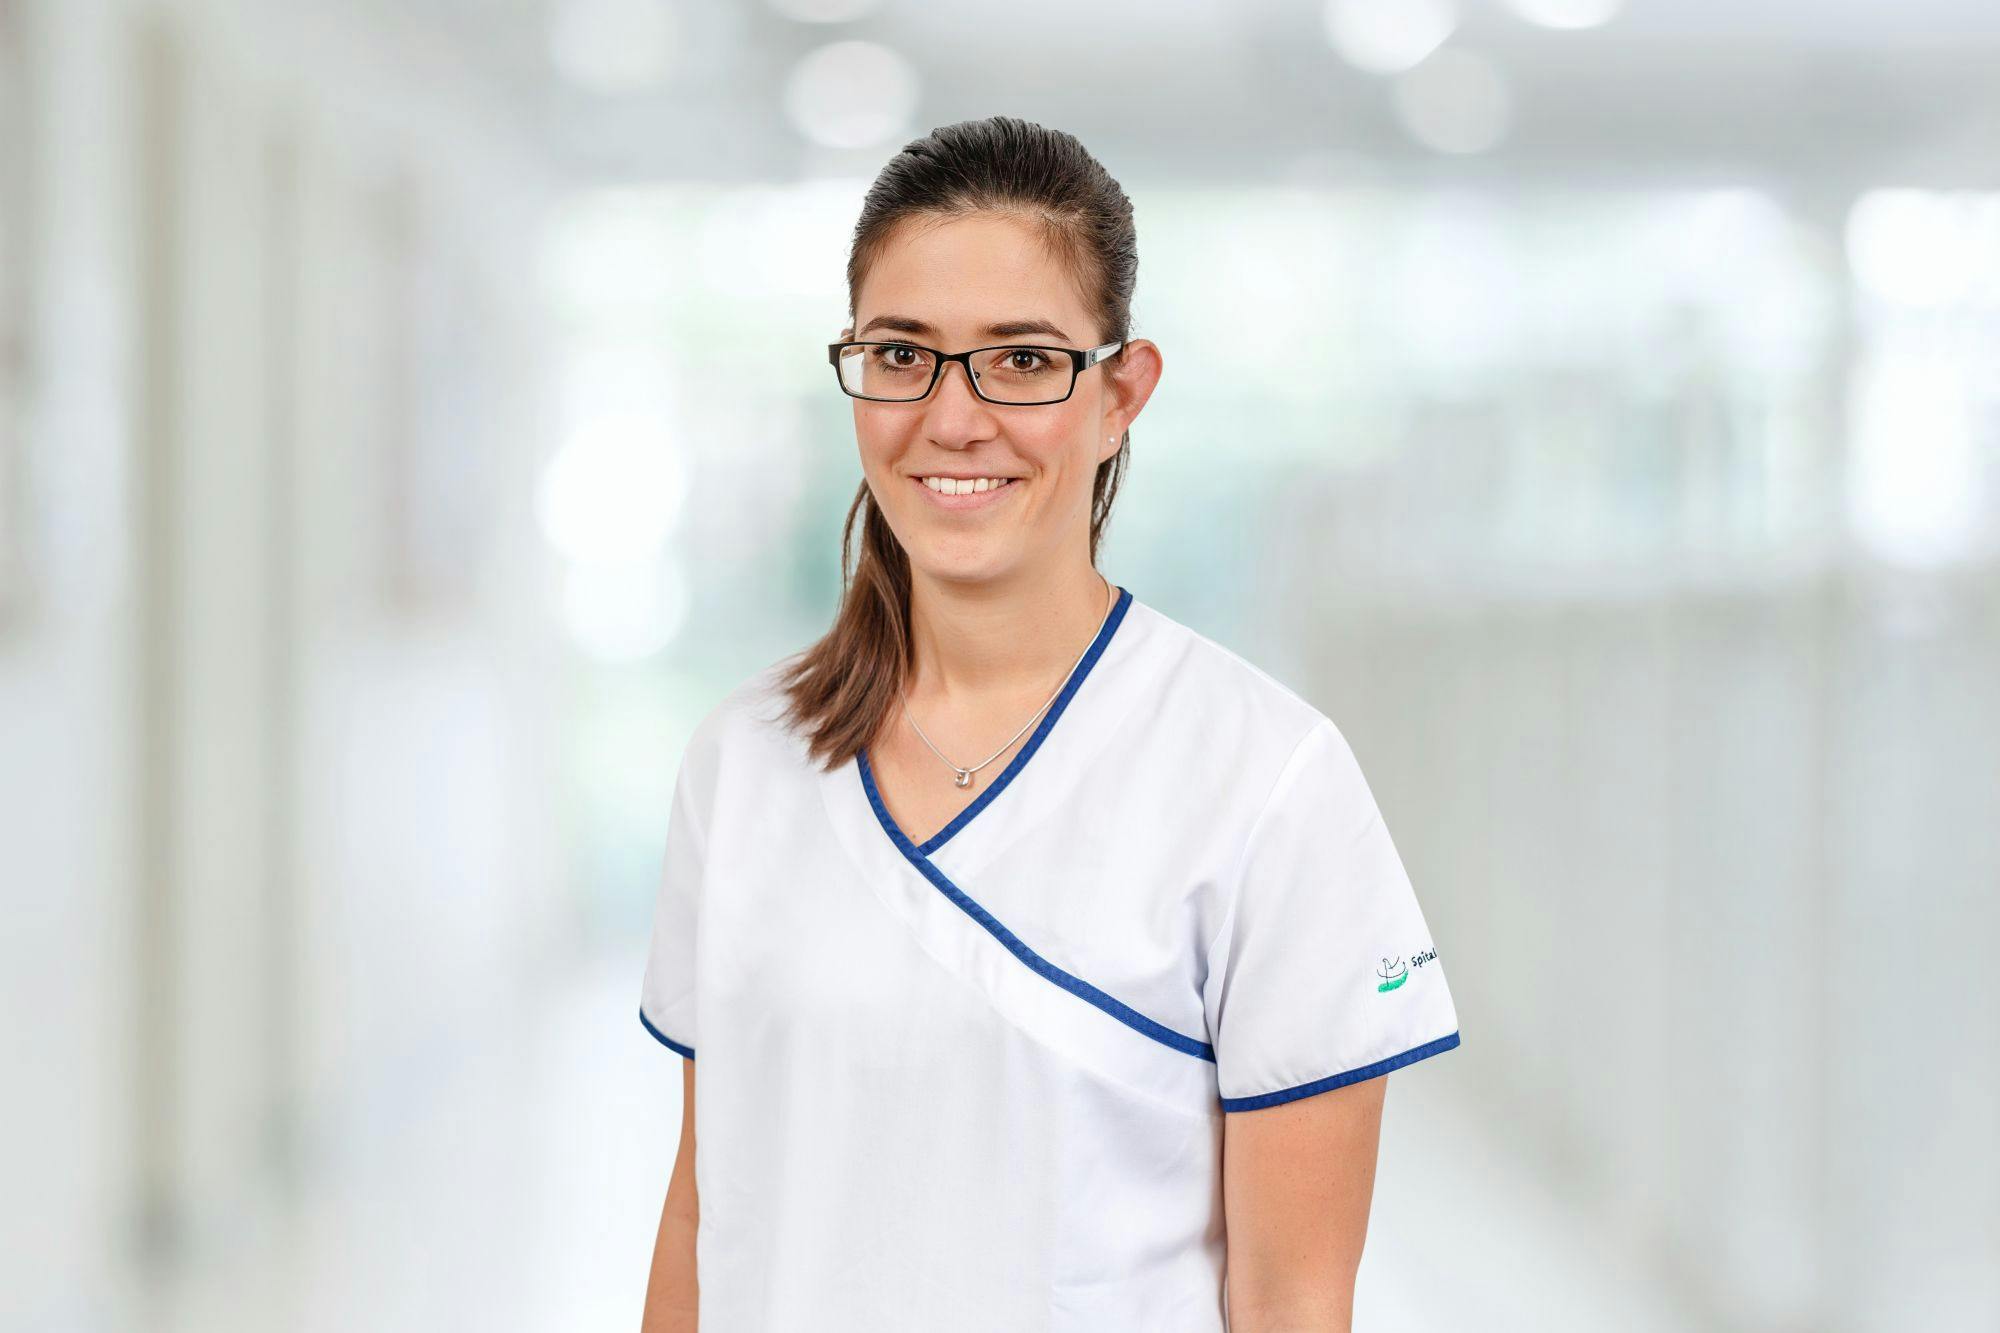 Smiling doctor with glasses and white professional clothing in front of a blurred background.